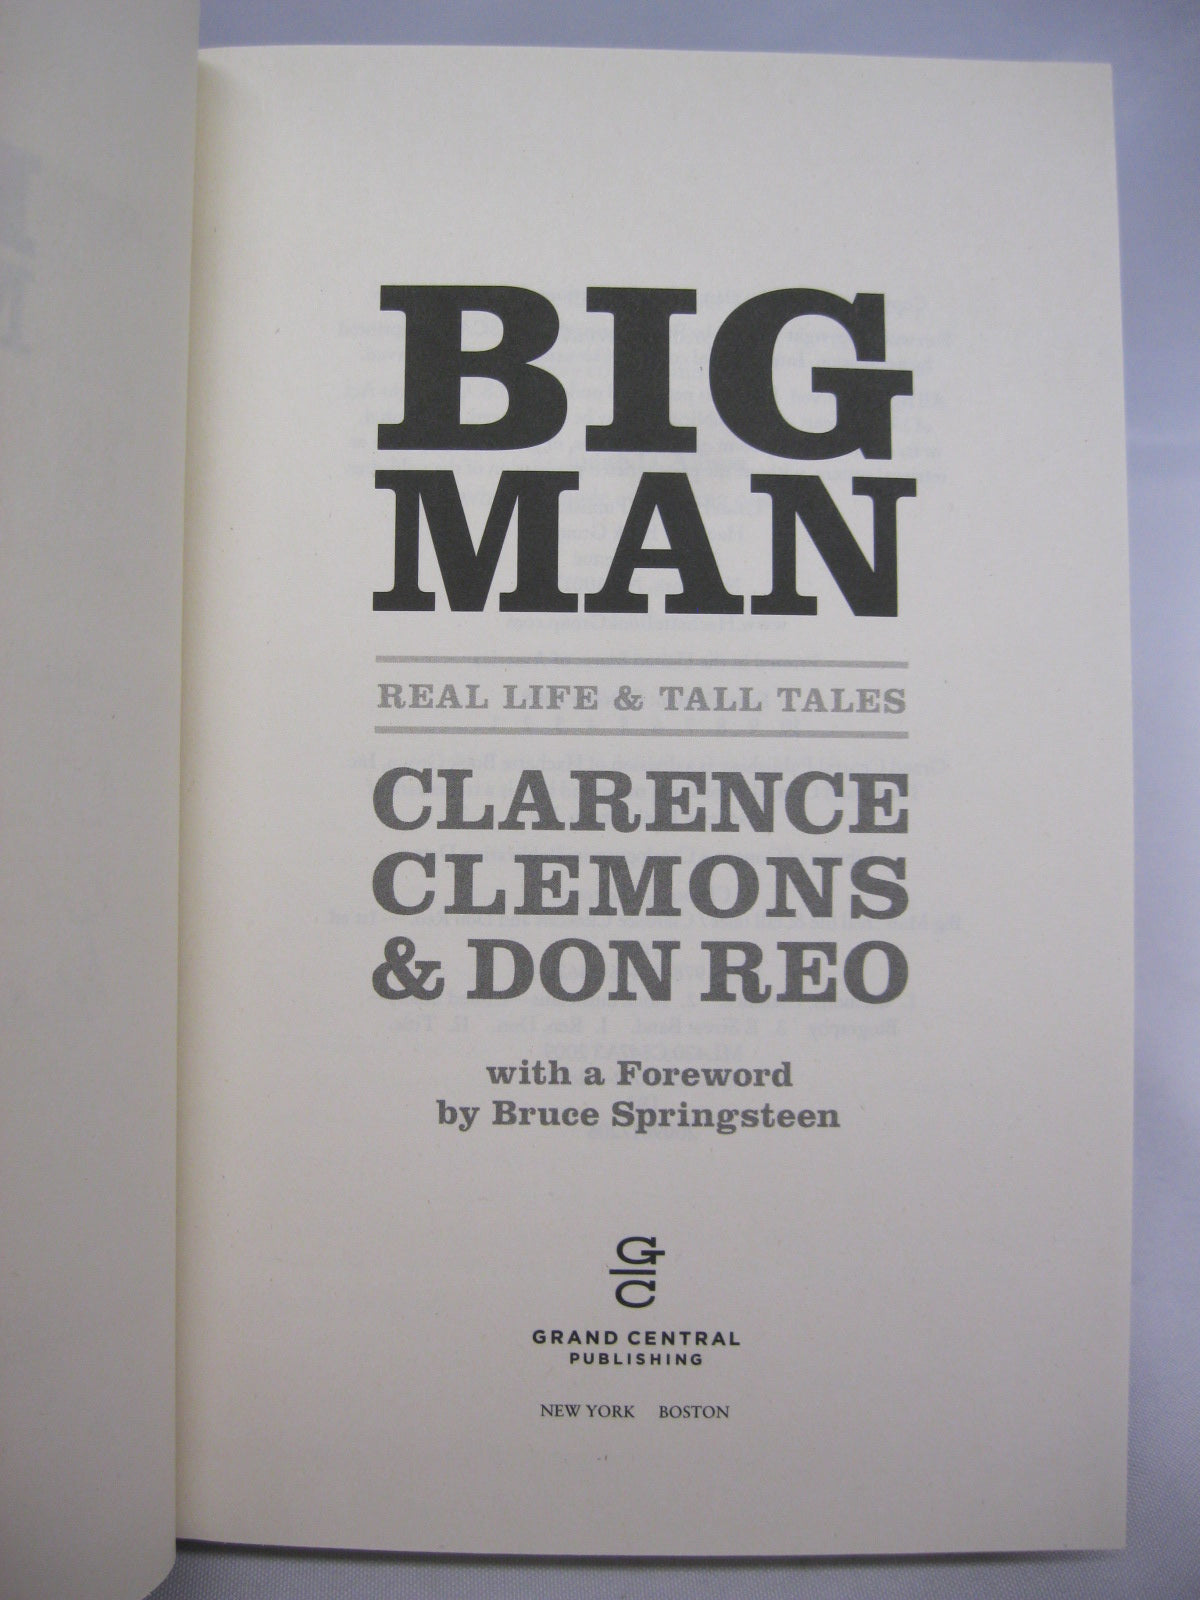 Big Man: Real Life & Tall Tales by Clarence Clemons and Don Reo